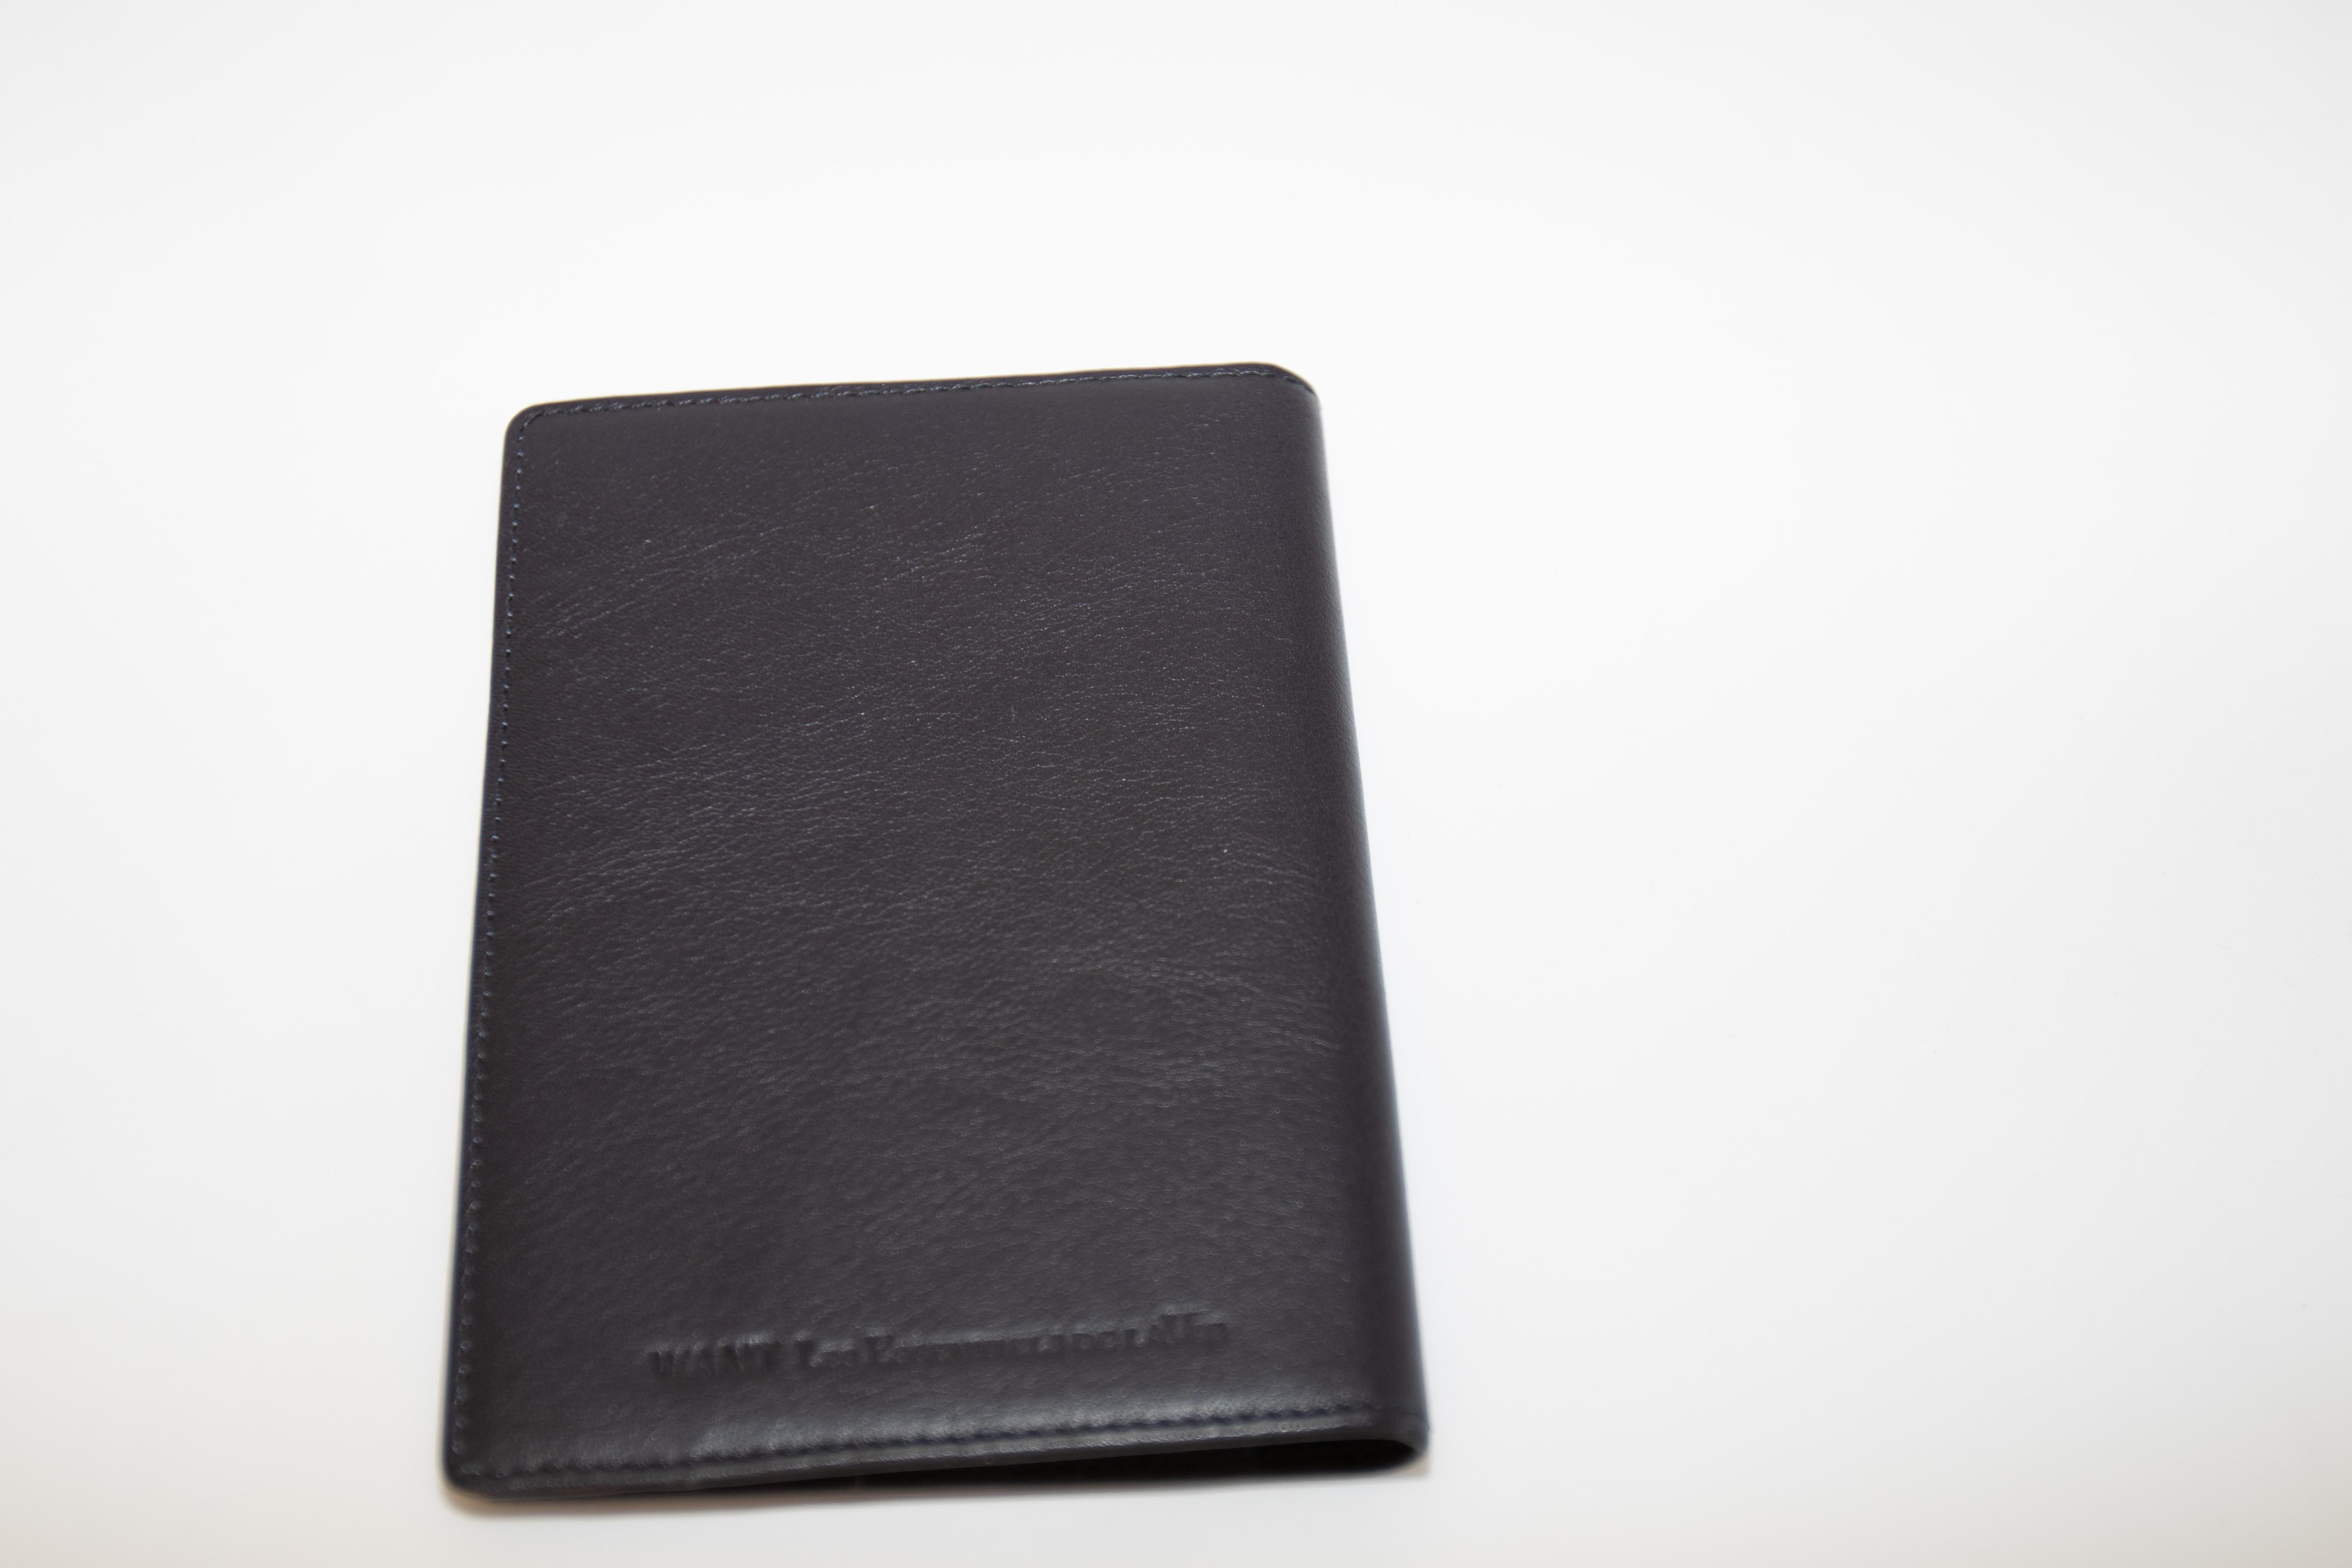 Want Les Essentiels de la Vie Passport Black Leather Passport Cover In Excellent Condition For Sale In North Hollywood, CA